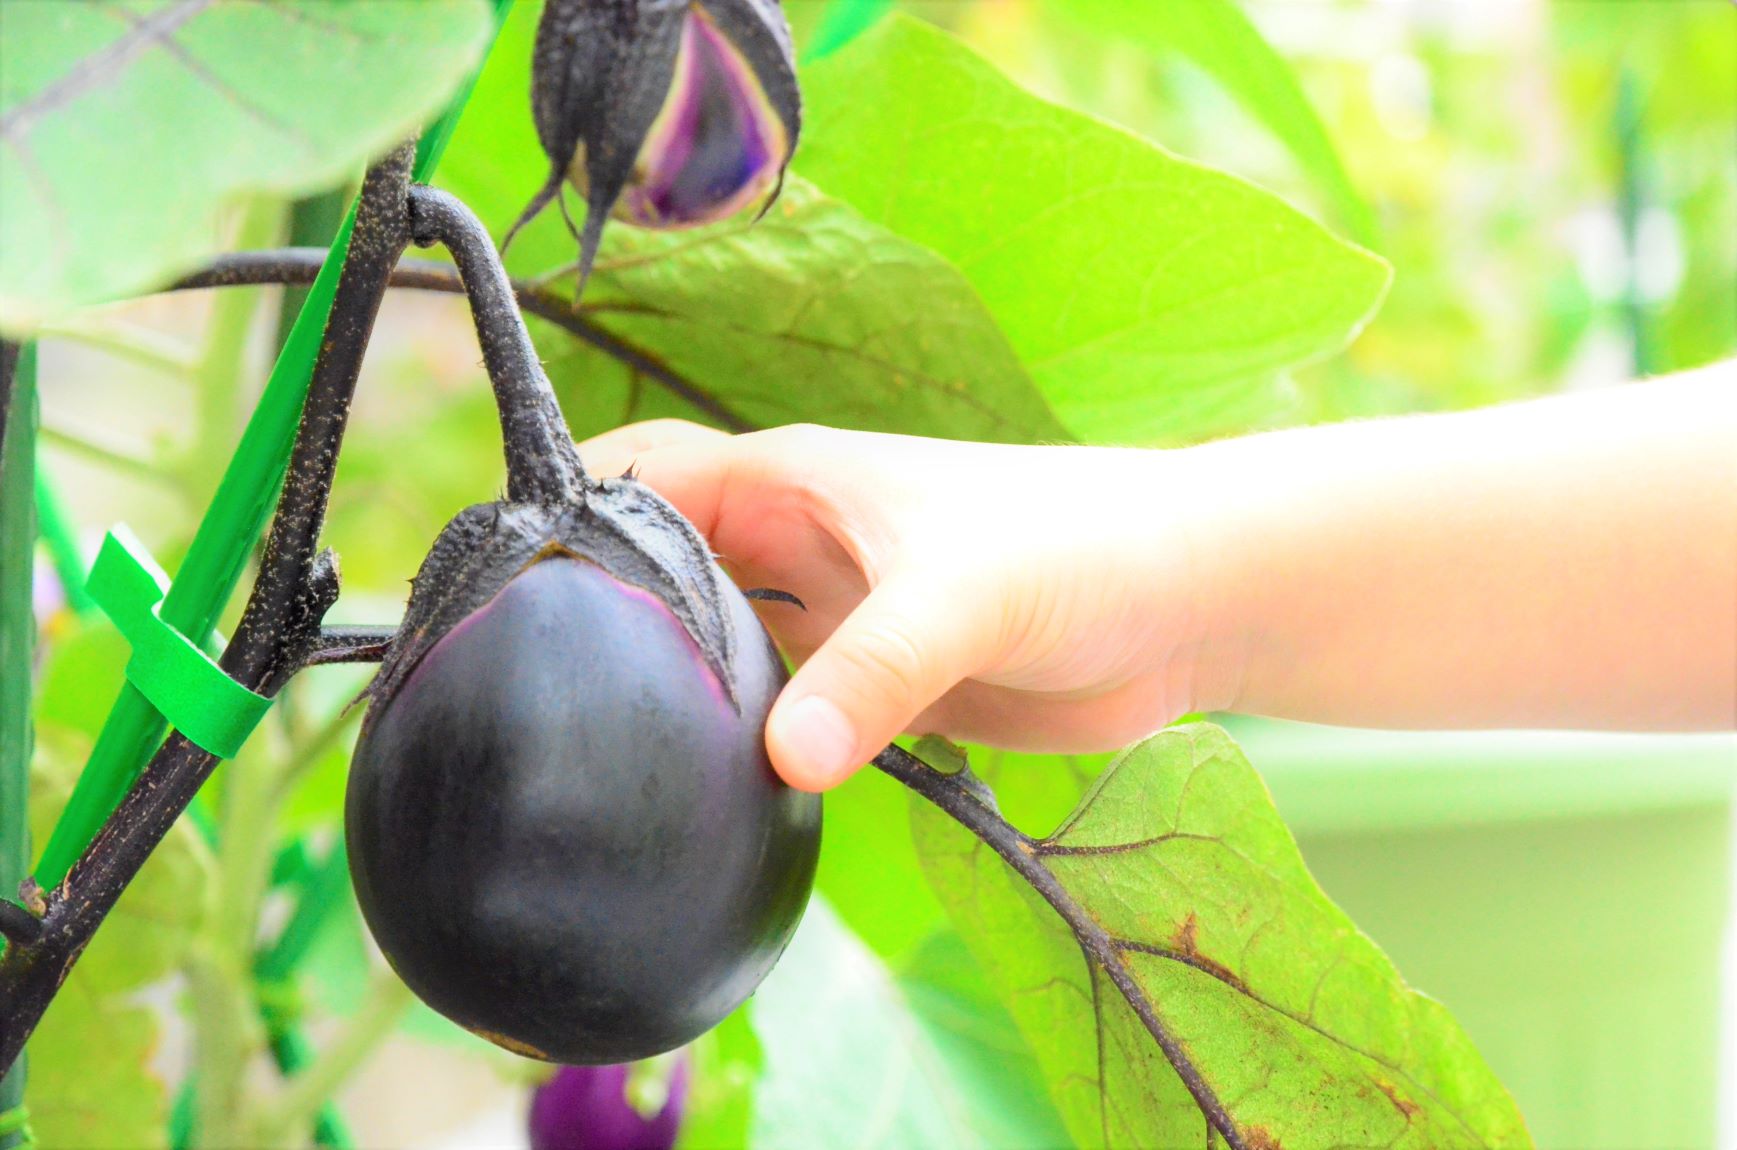 She can't wait to harvest the first eggplant